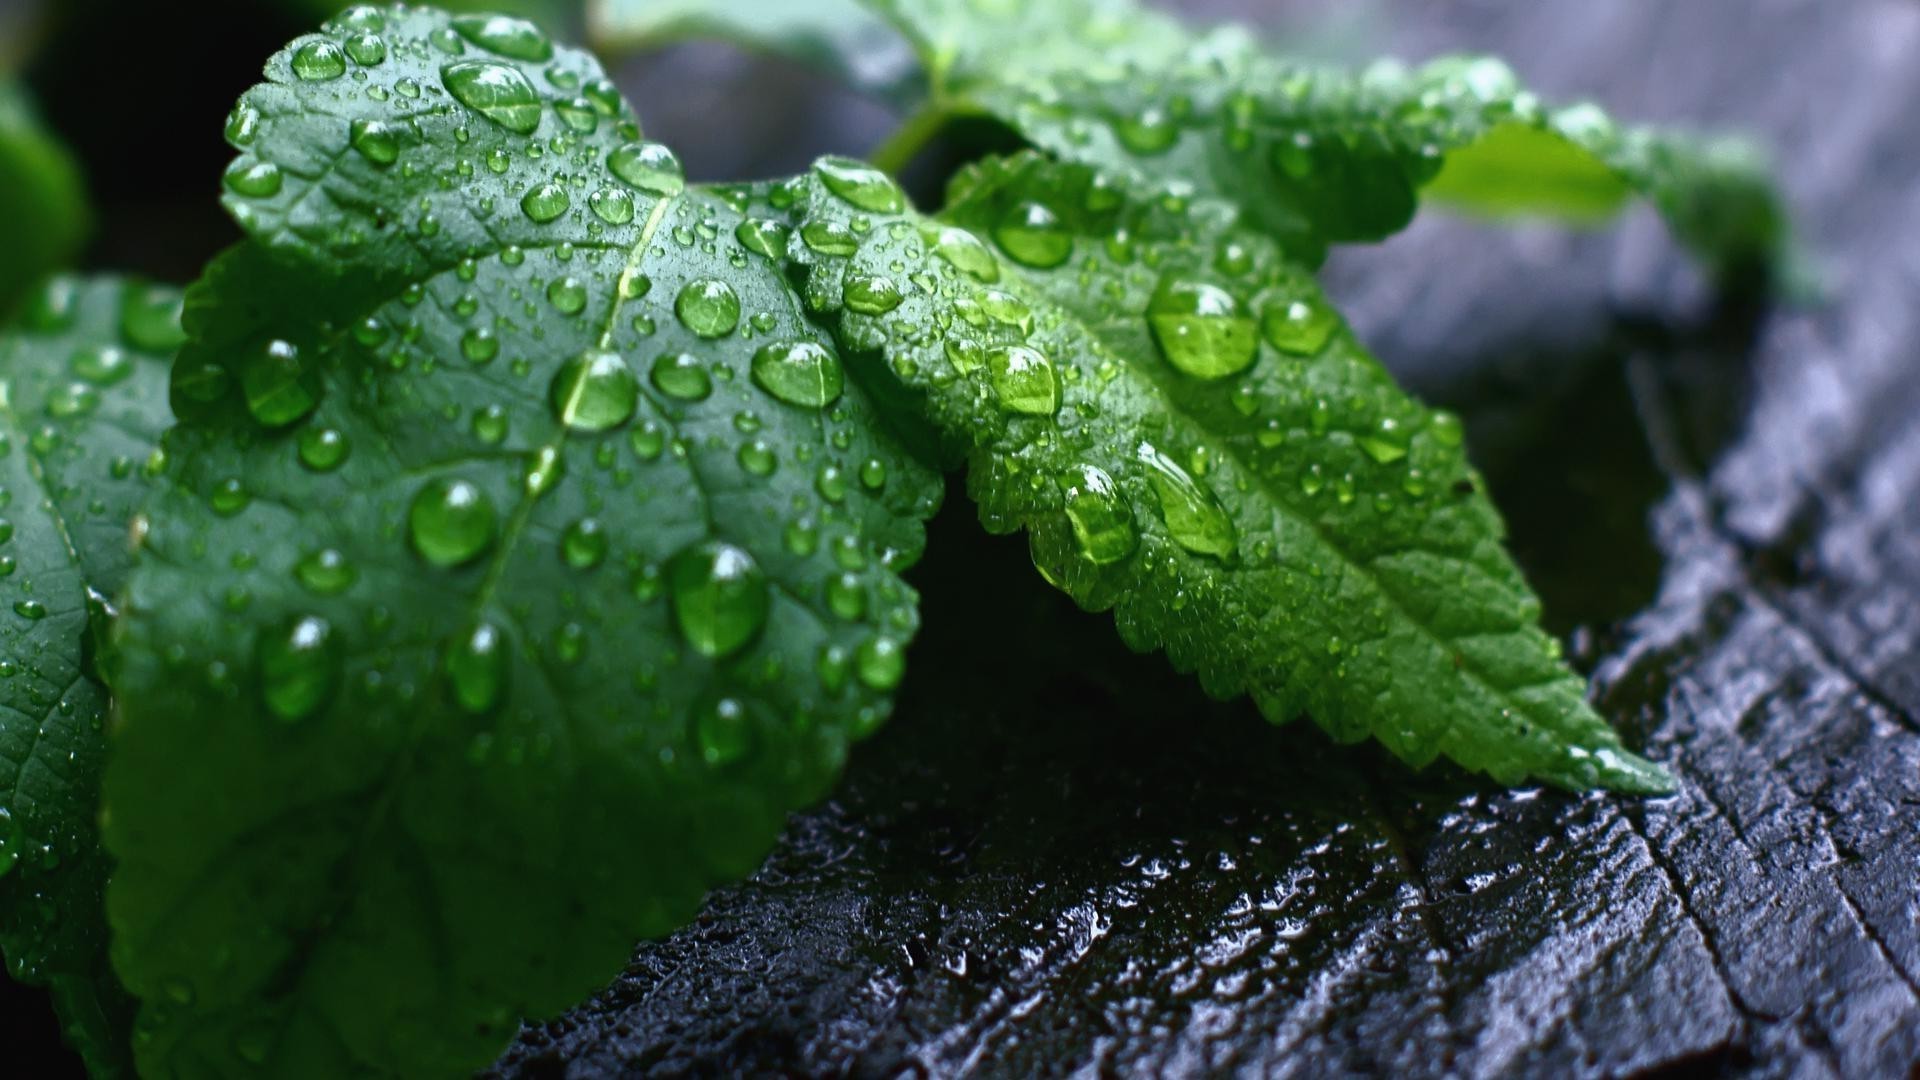 droplets and water leaf rain drop flora dew nature wet growth water freshness purity environment droplet garden close-up